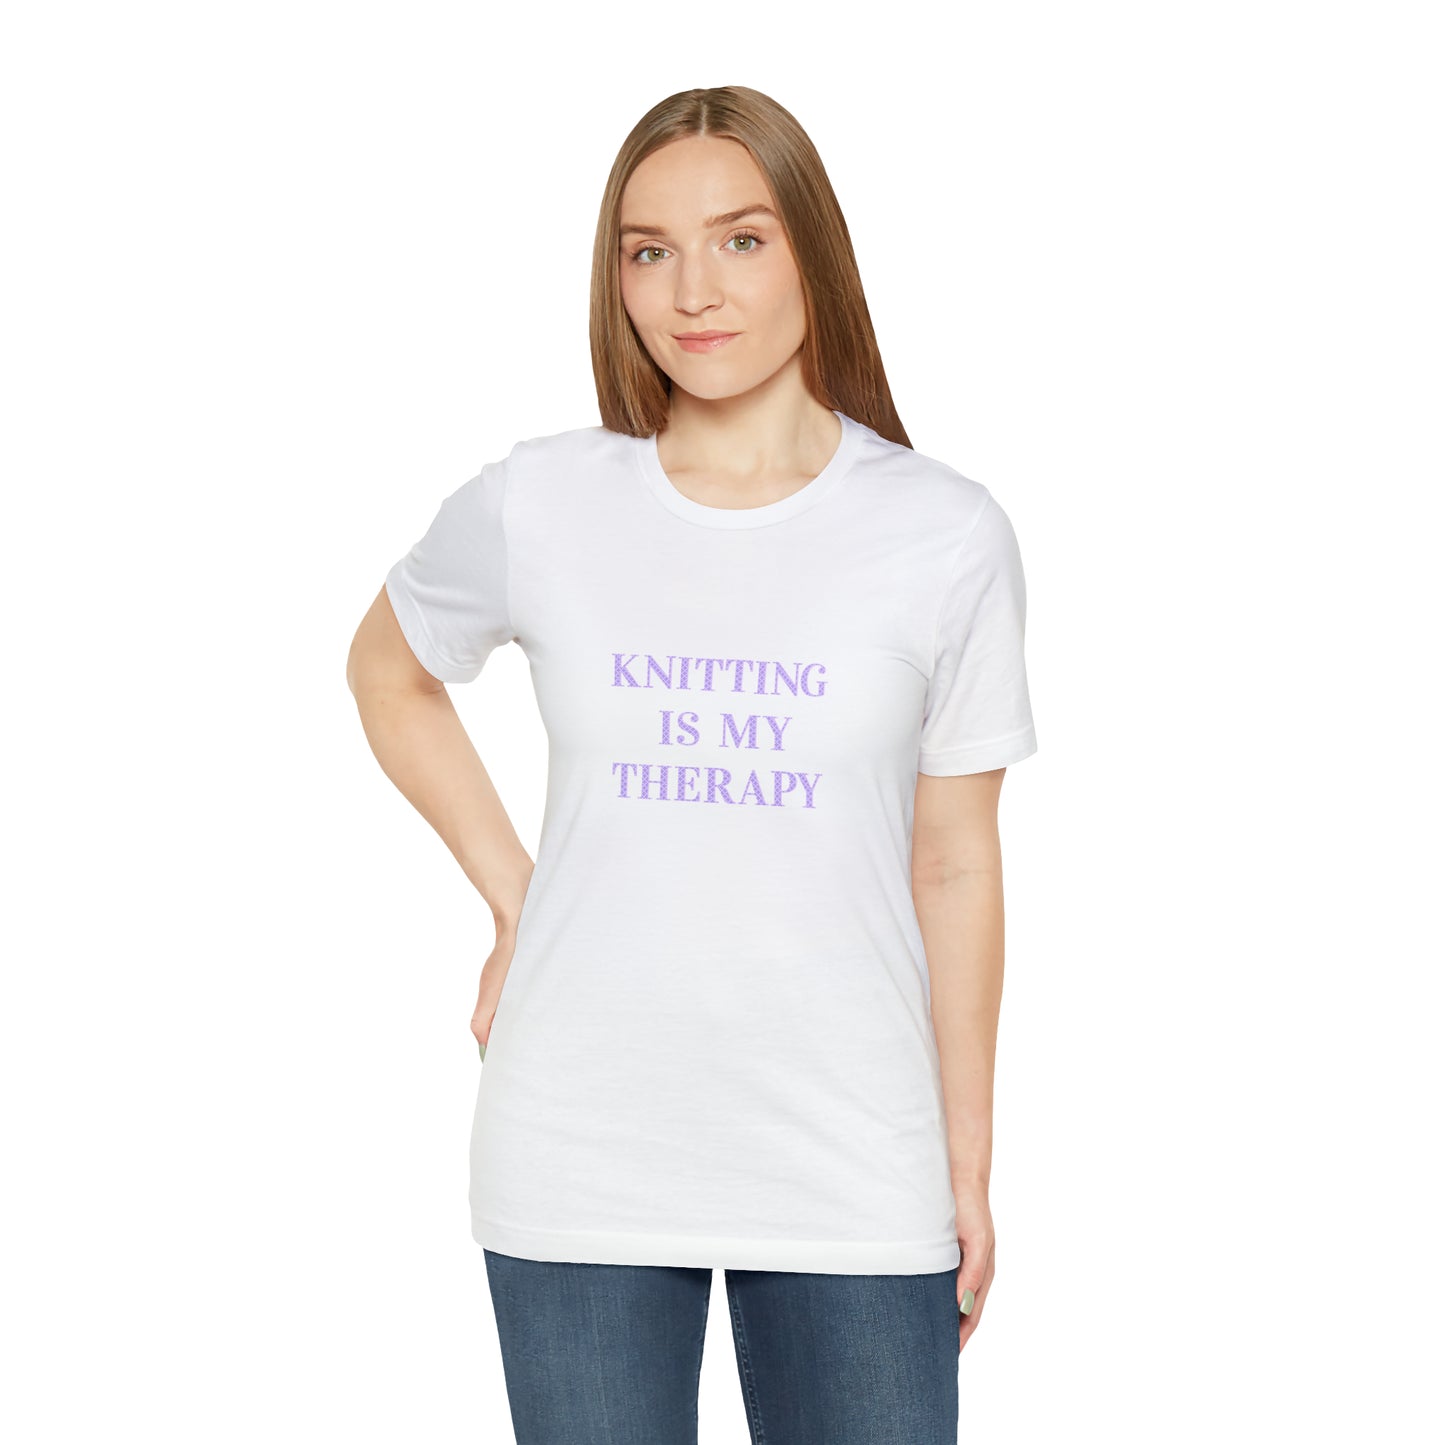 Knitting Is My Therapy- Adult, Regular Fit, Smaller Size Image, Soft Cotton T-shirt